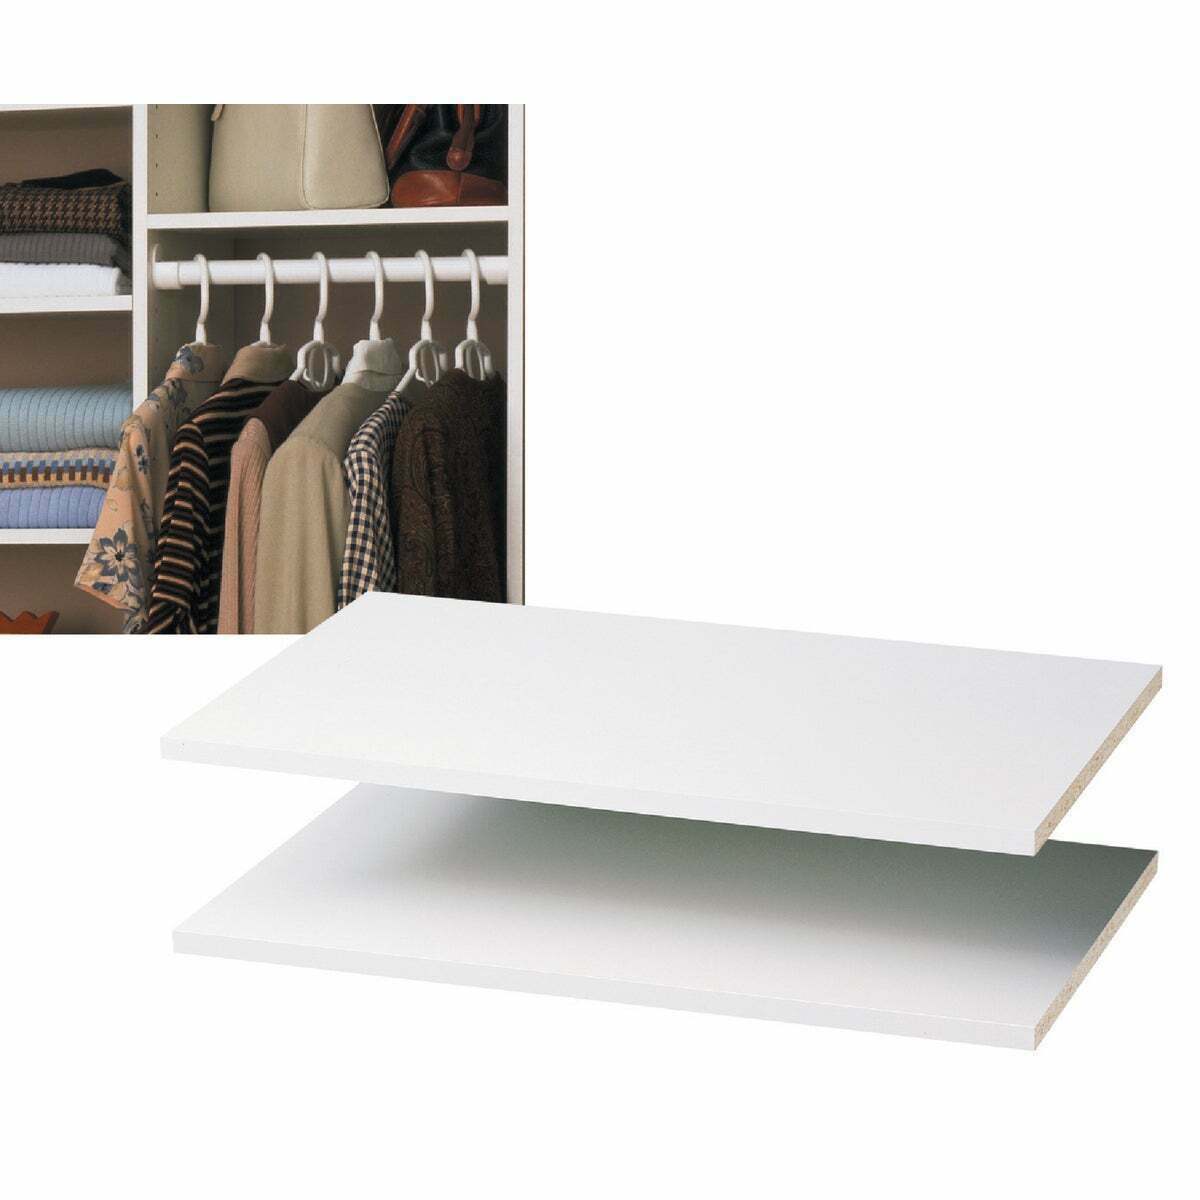 Easy Track 2' Ft. W. x 14'' In. D. Laminated Closet Shelf, White (2-Pack) RS1423 - $42.21